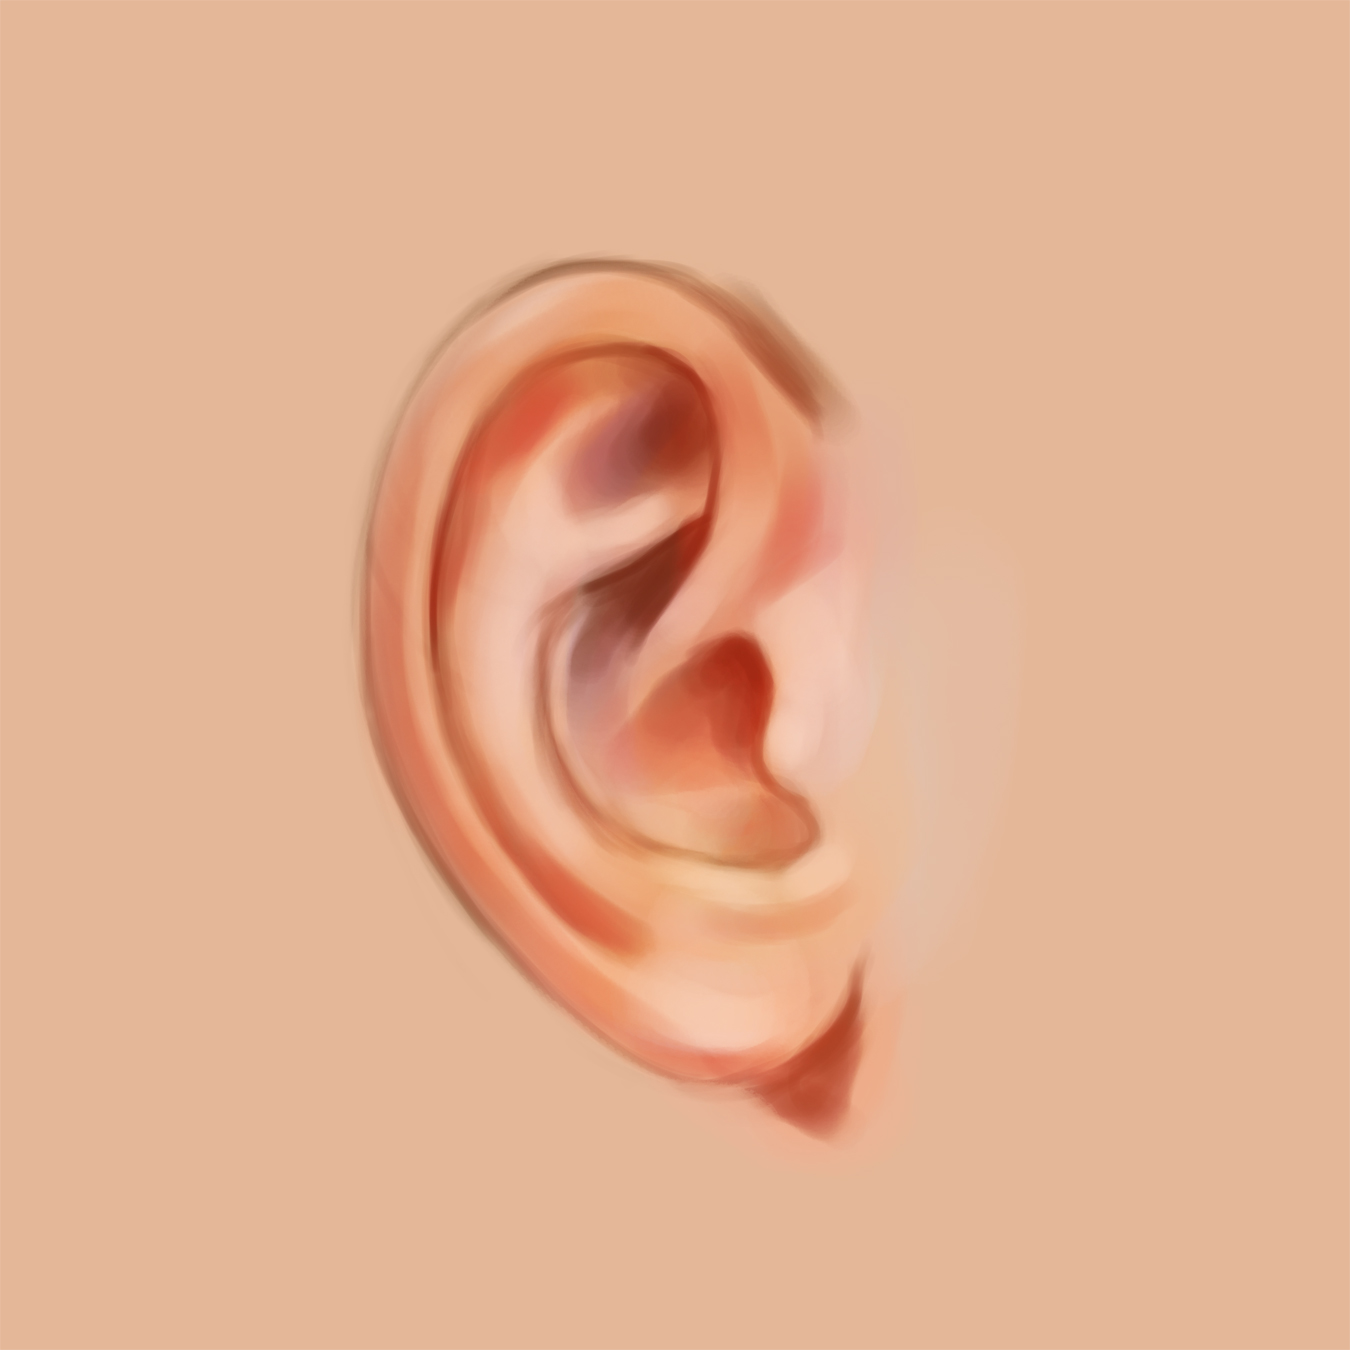 Ear drawing clipart | Clipart Nepal